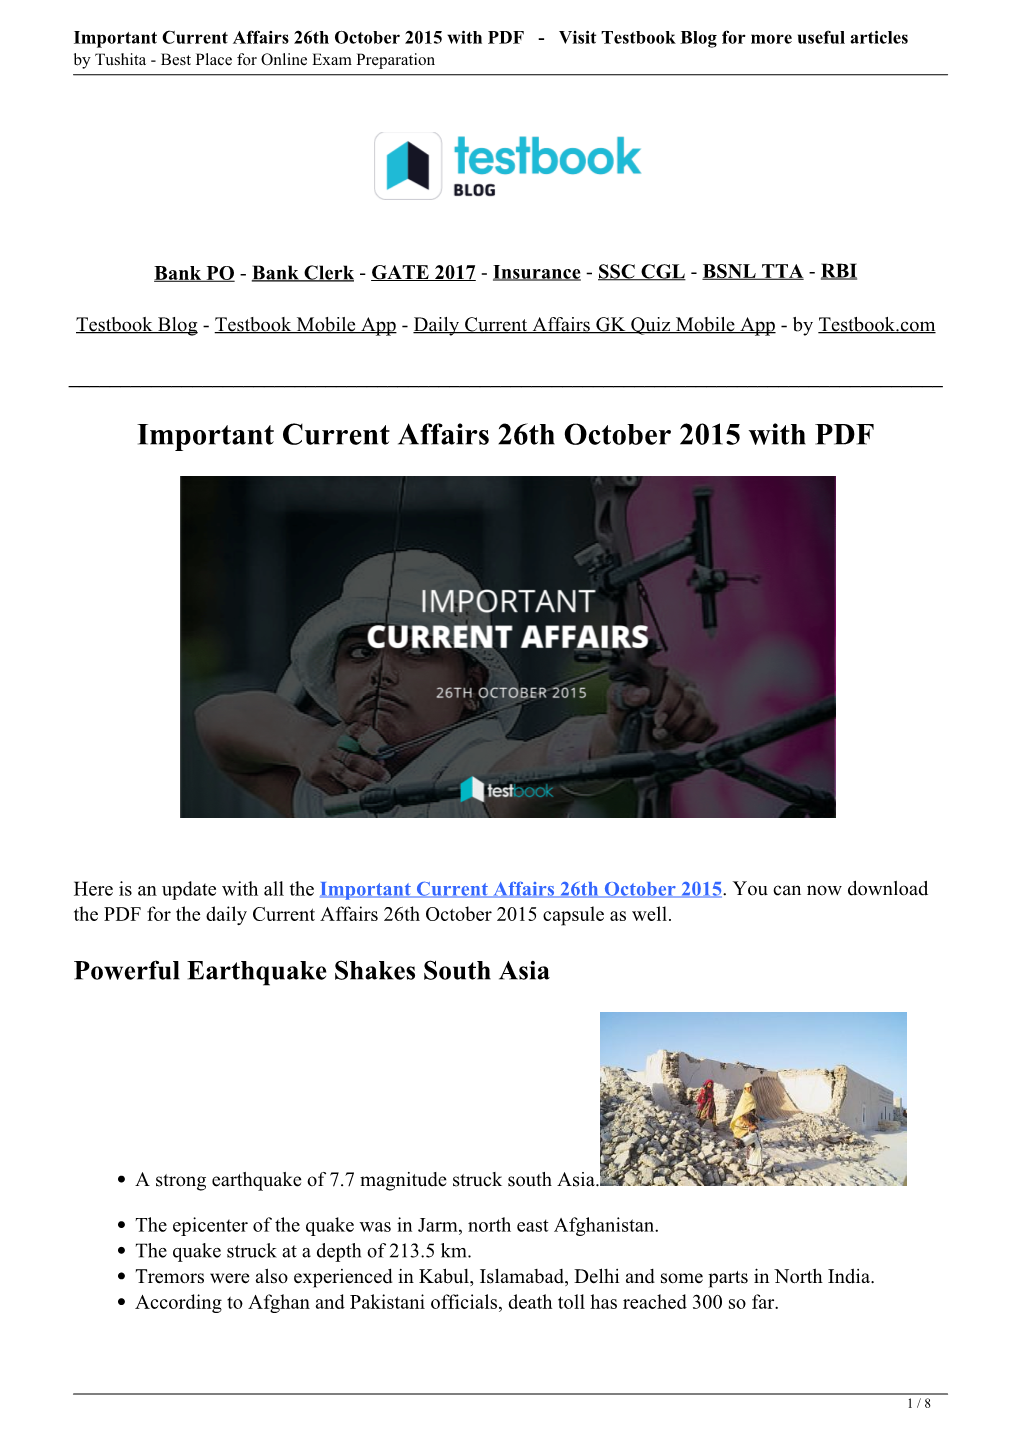 Important Current Affairs 26Th October 2015 with PDF - Visit Testbook Blog for More Useful Articles by Tushita - Best Place for Online Exam Preparation